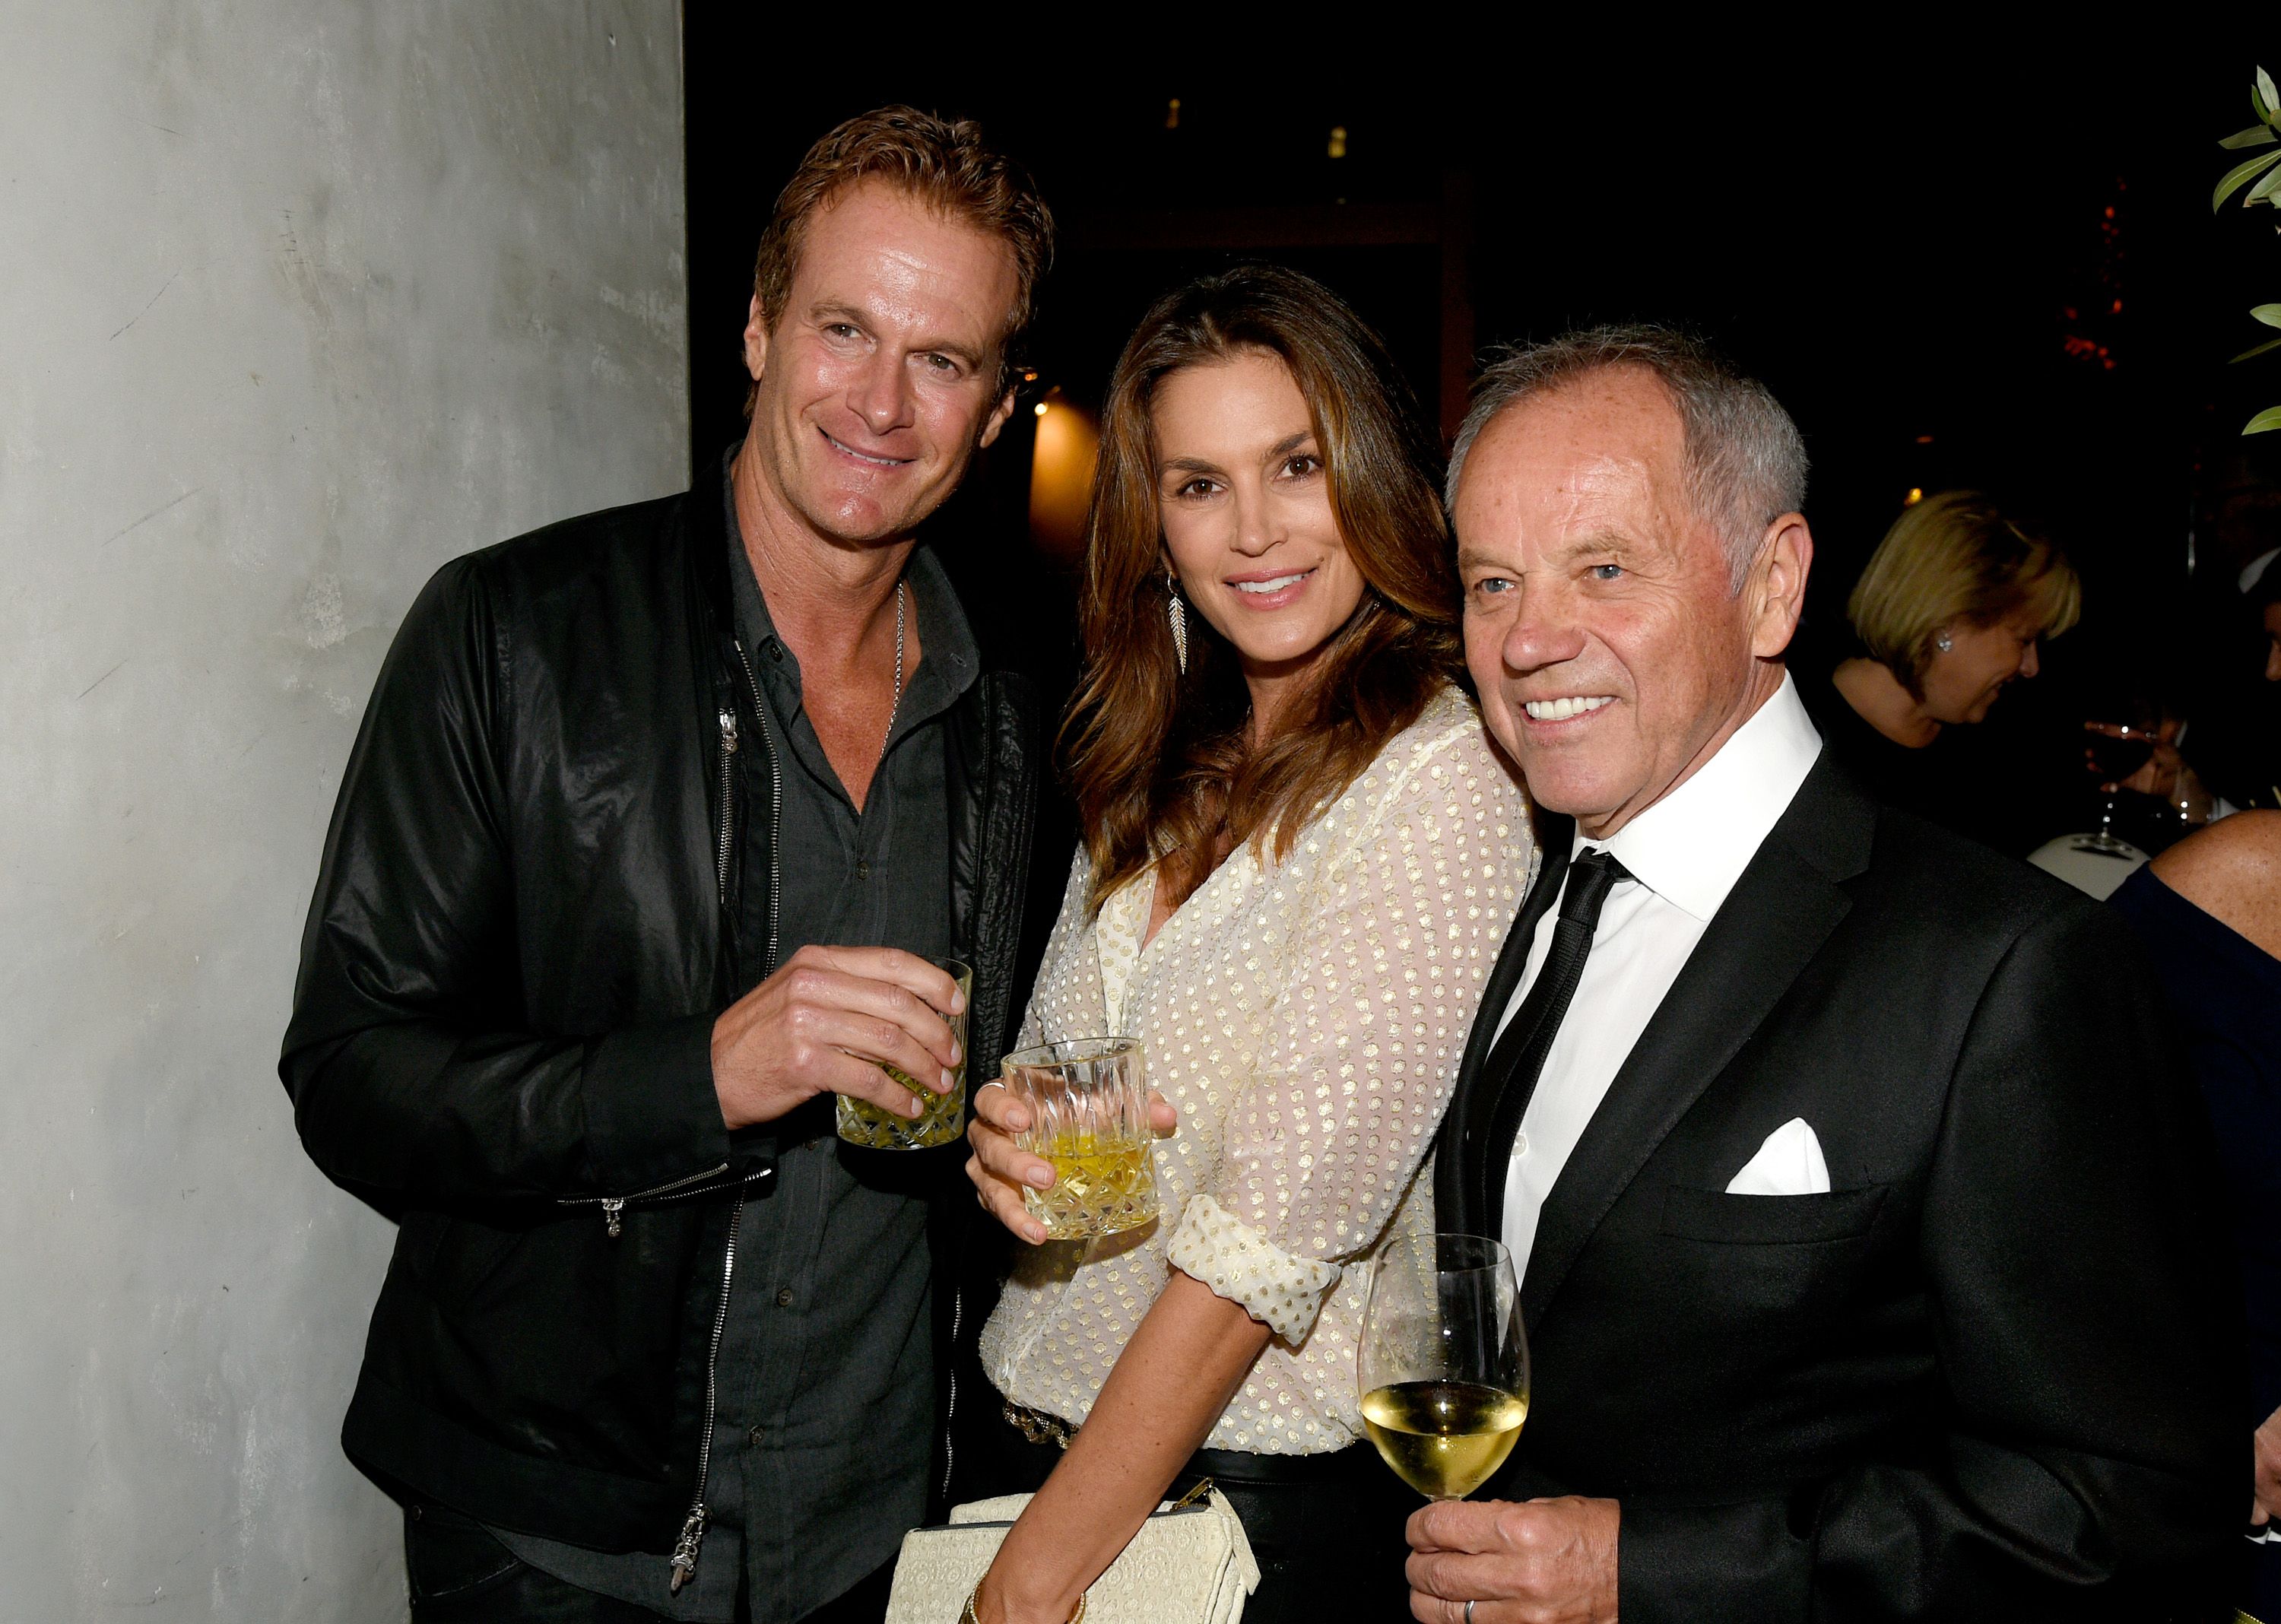 Cindy Crawford attends Wolfgang Puck Hollywood Walk of Fame party